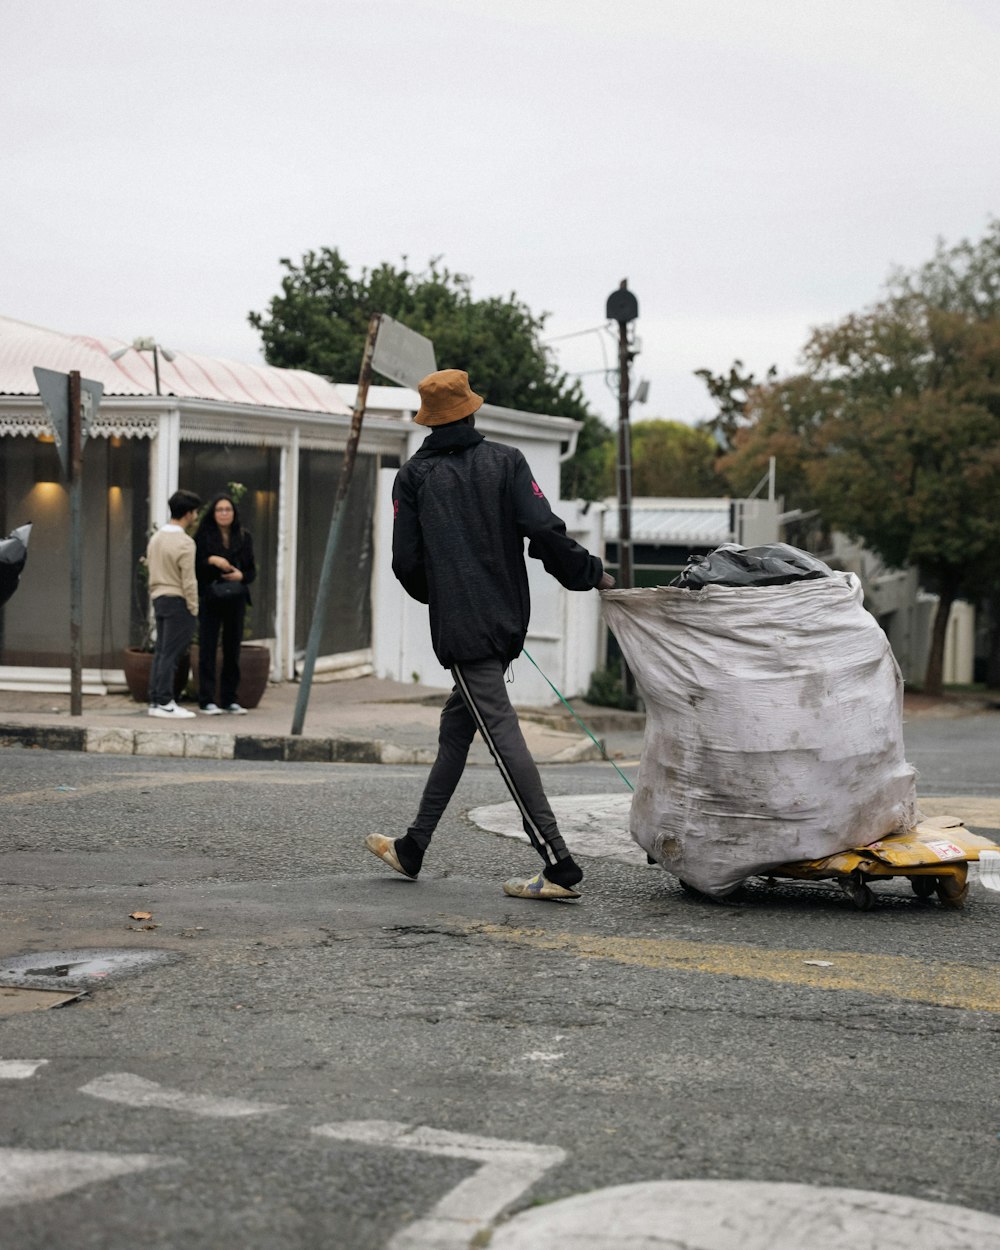 a man pushing a cart with a large bag on it